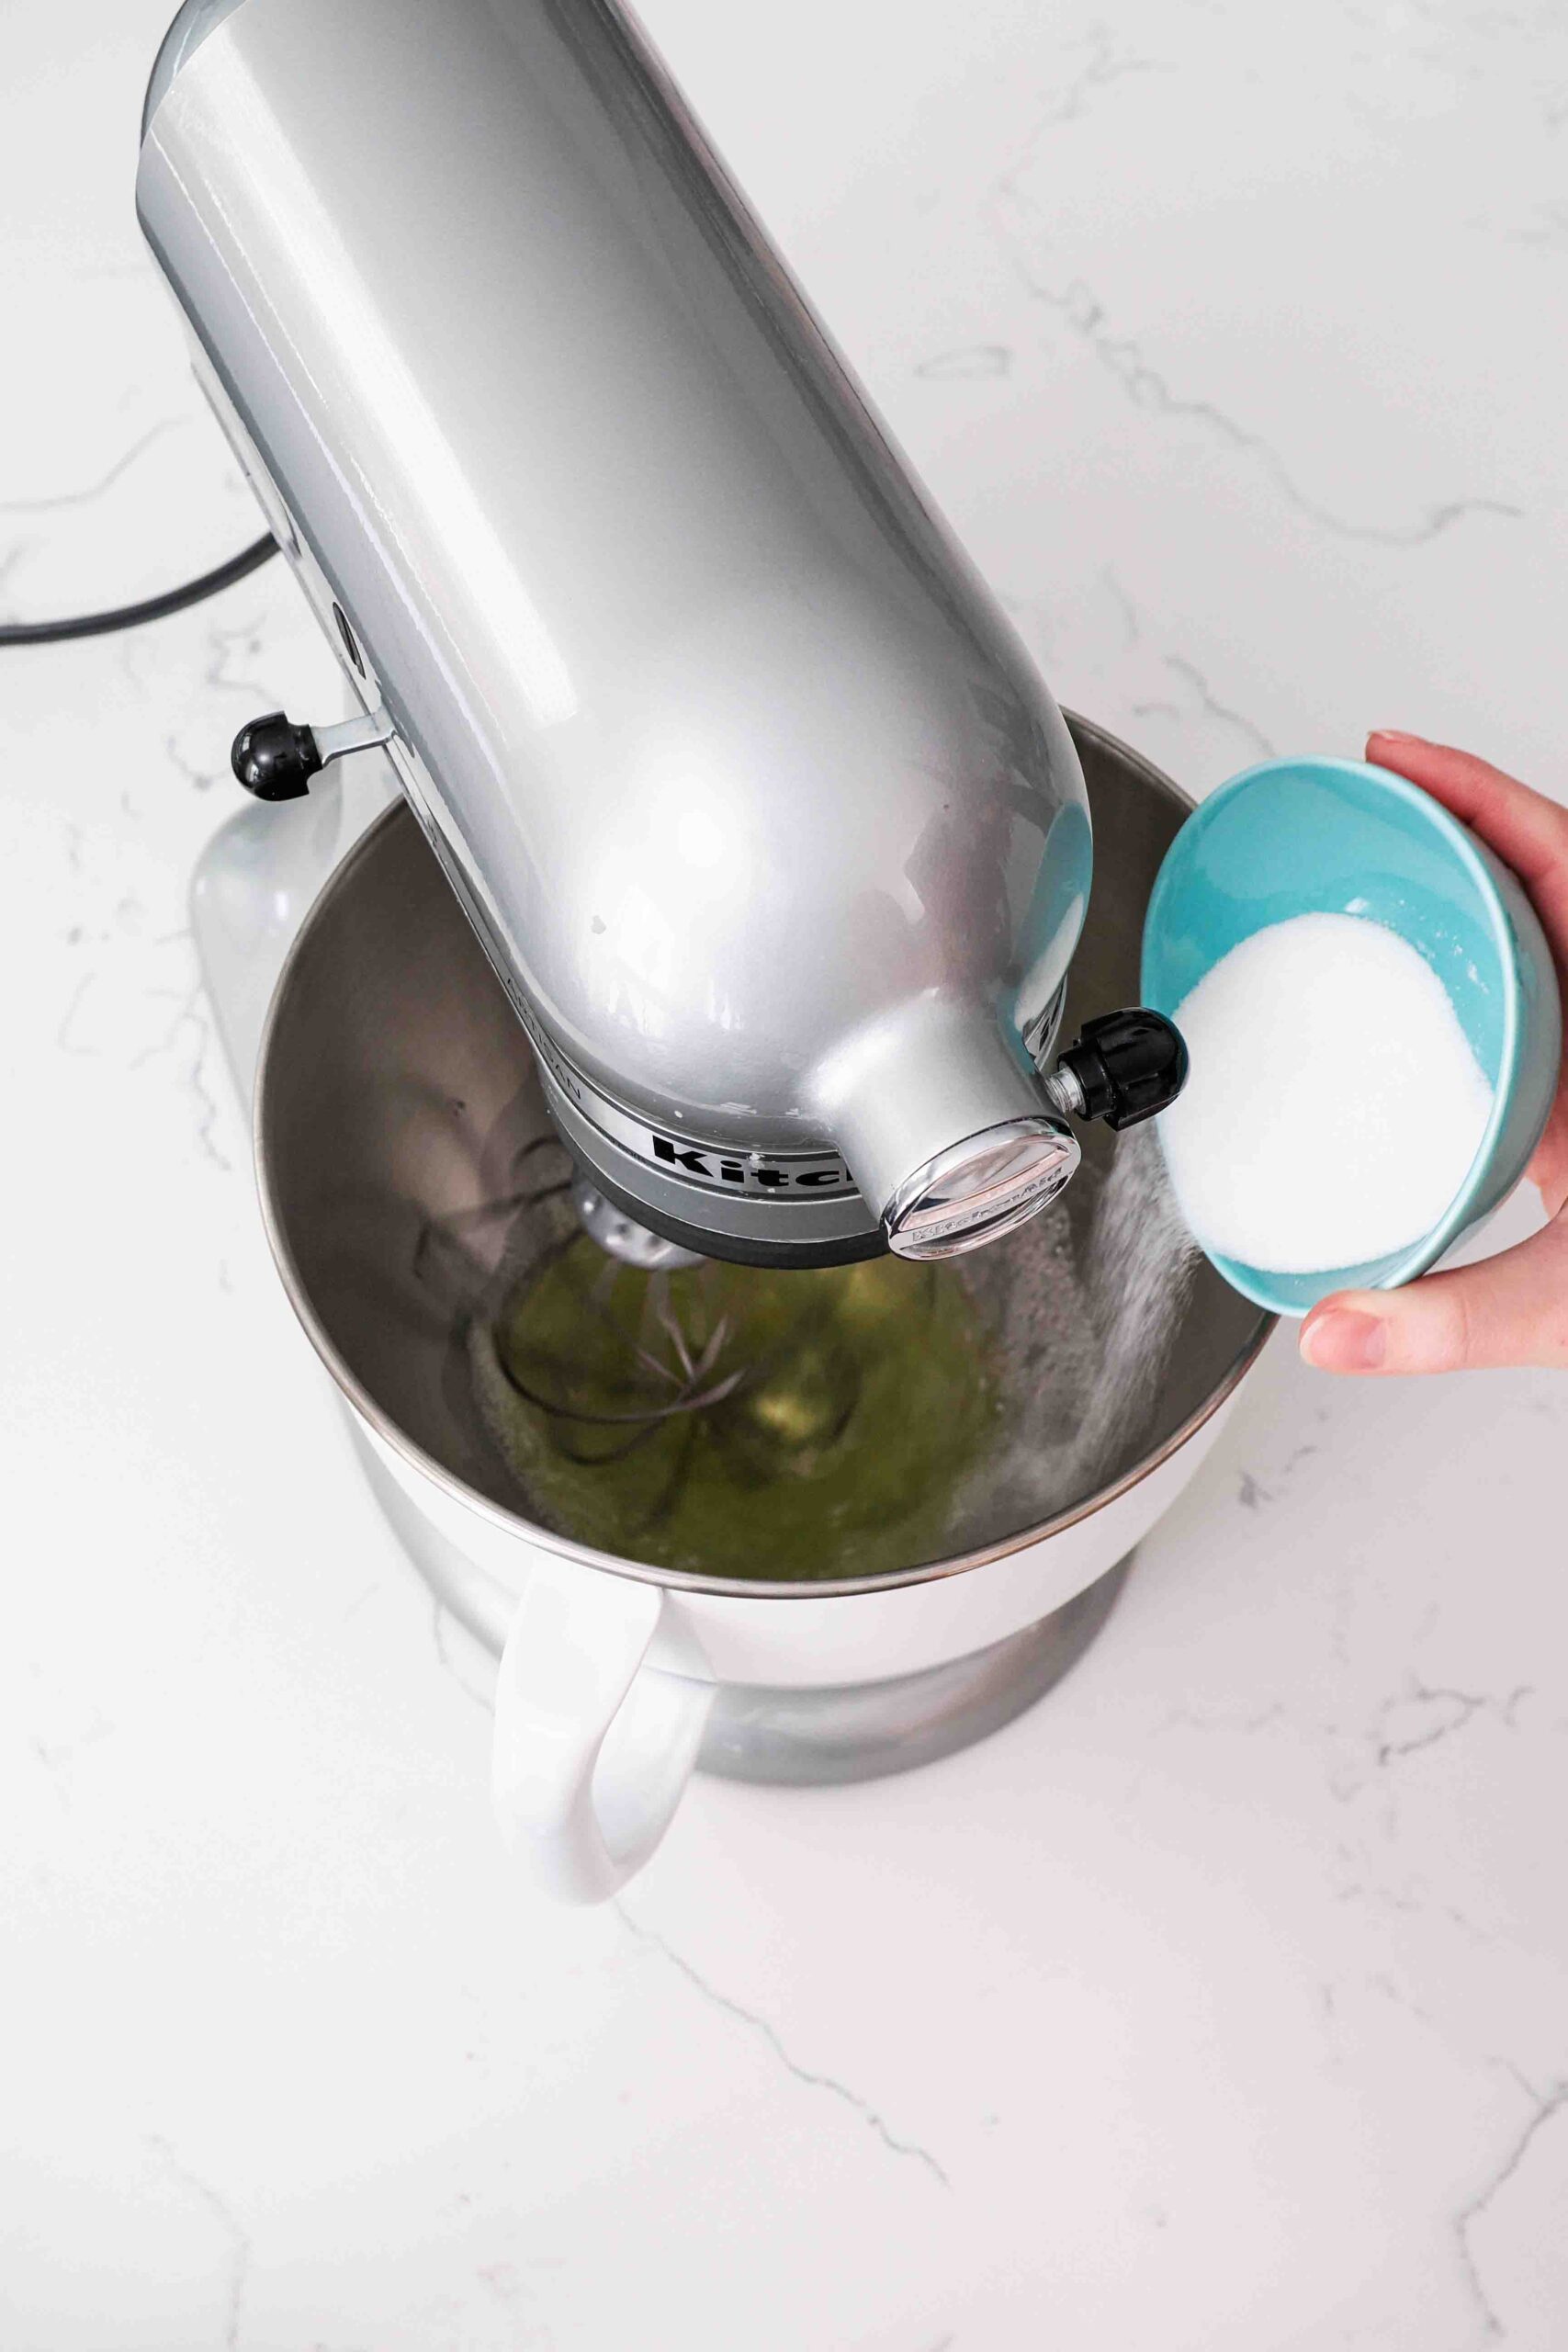 A hand sprinkles granulated sugar into the bowl of a stand mixer whisking egg whites.